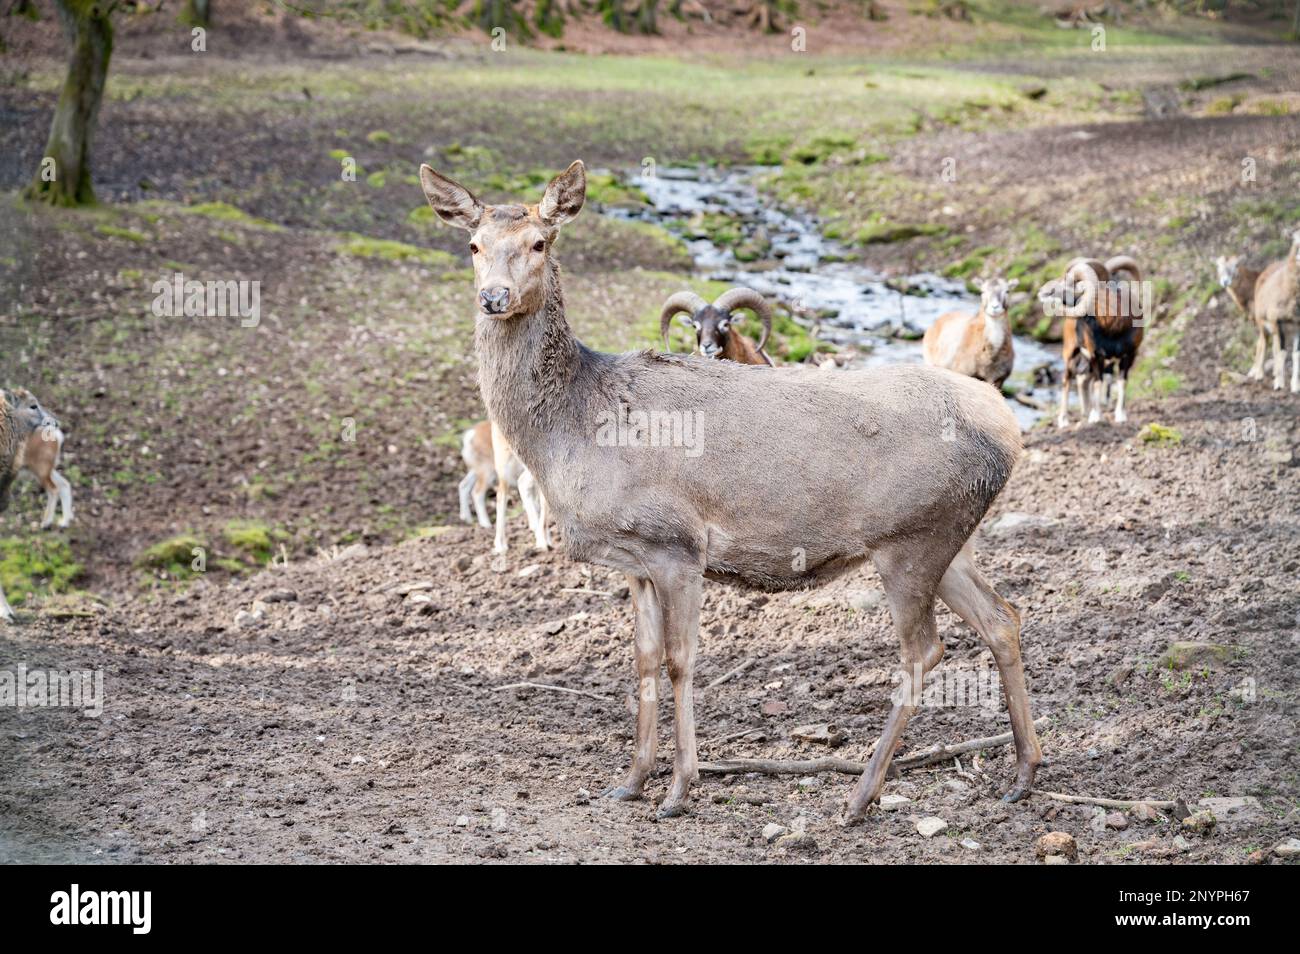 Doe, Female Deer Cow standing in front of a group of goats and billy goats, looking at camera, river in the background, Wildlife Park Brudergrund, Erb Stock Photo